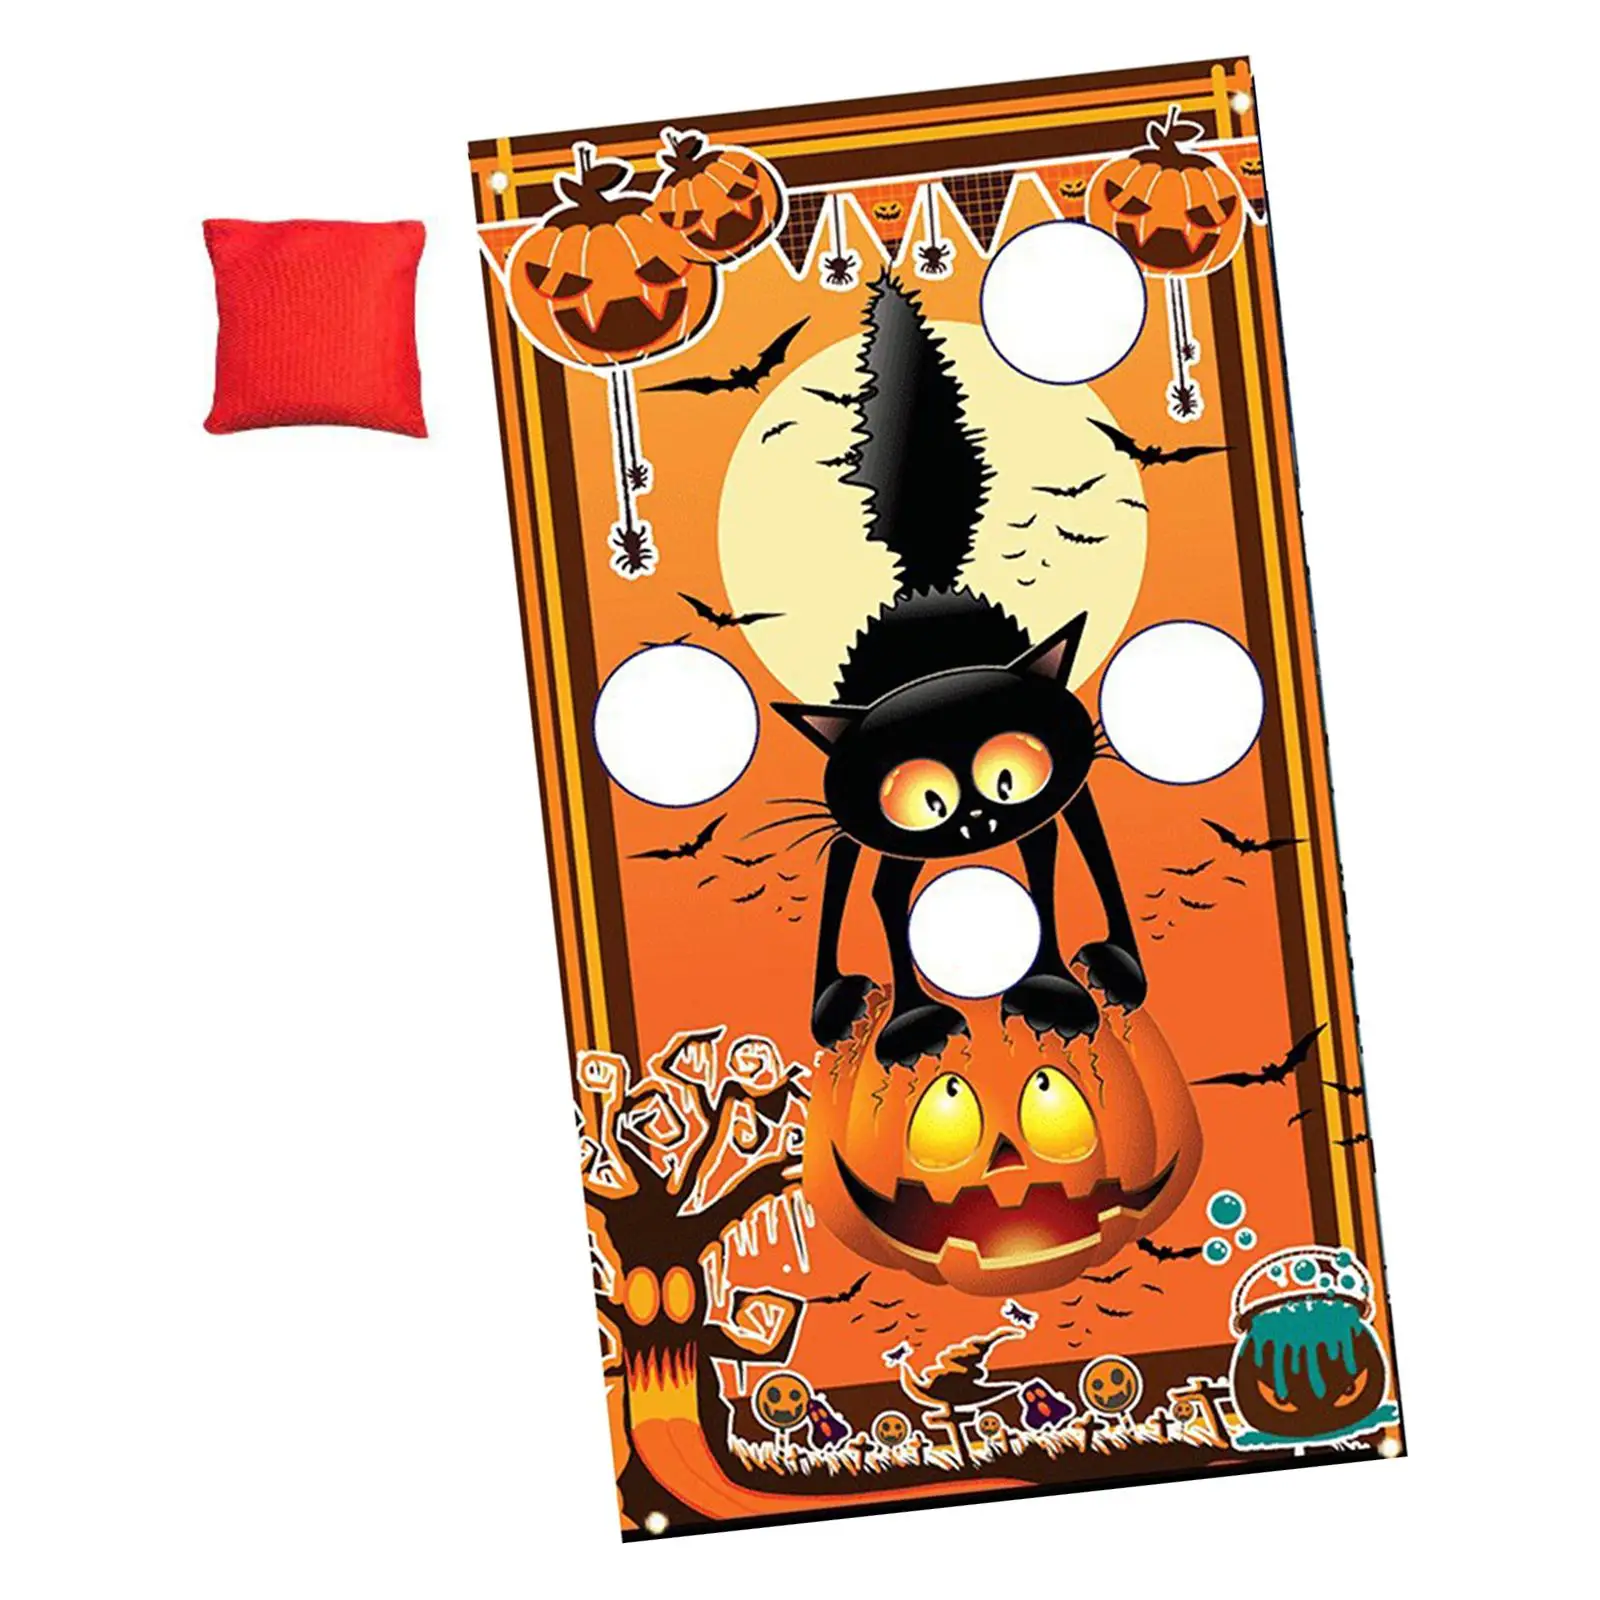 Pumpkin Halloween Toss Favors Toys Reusable with Haning Rope Party Games for Activities Outside Beach Camping